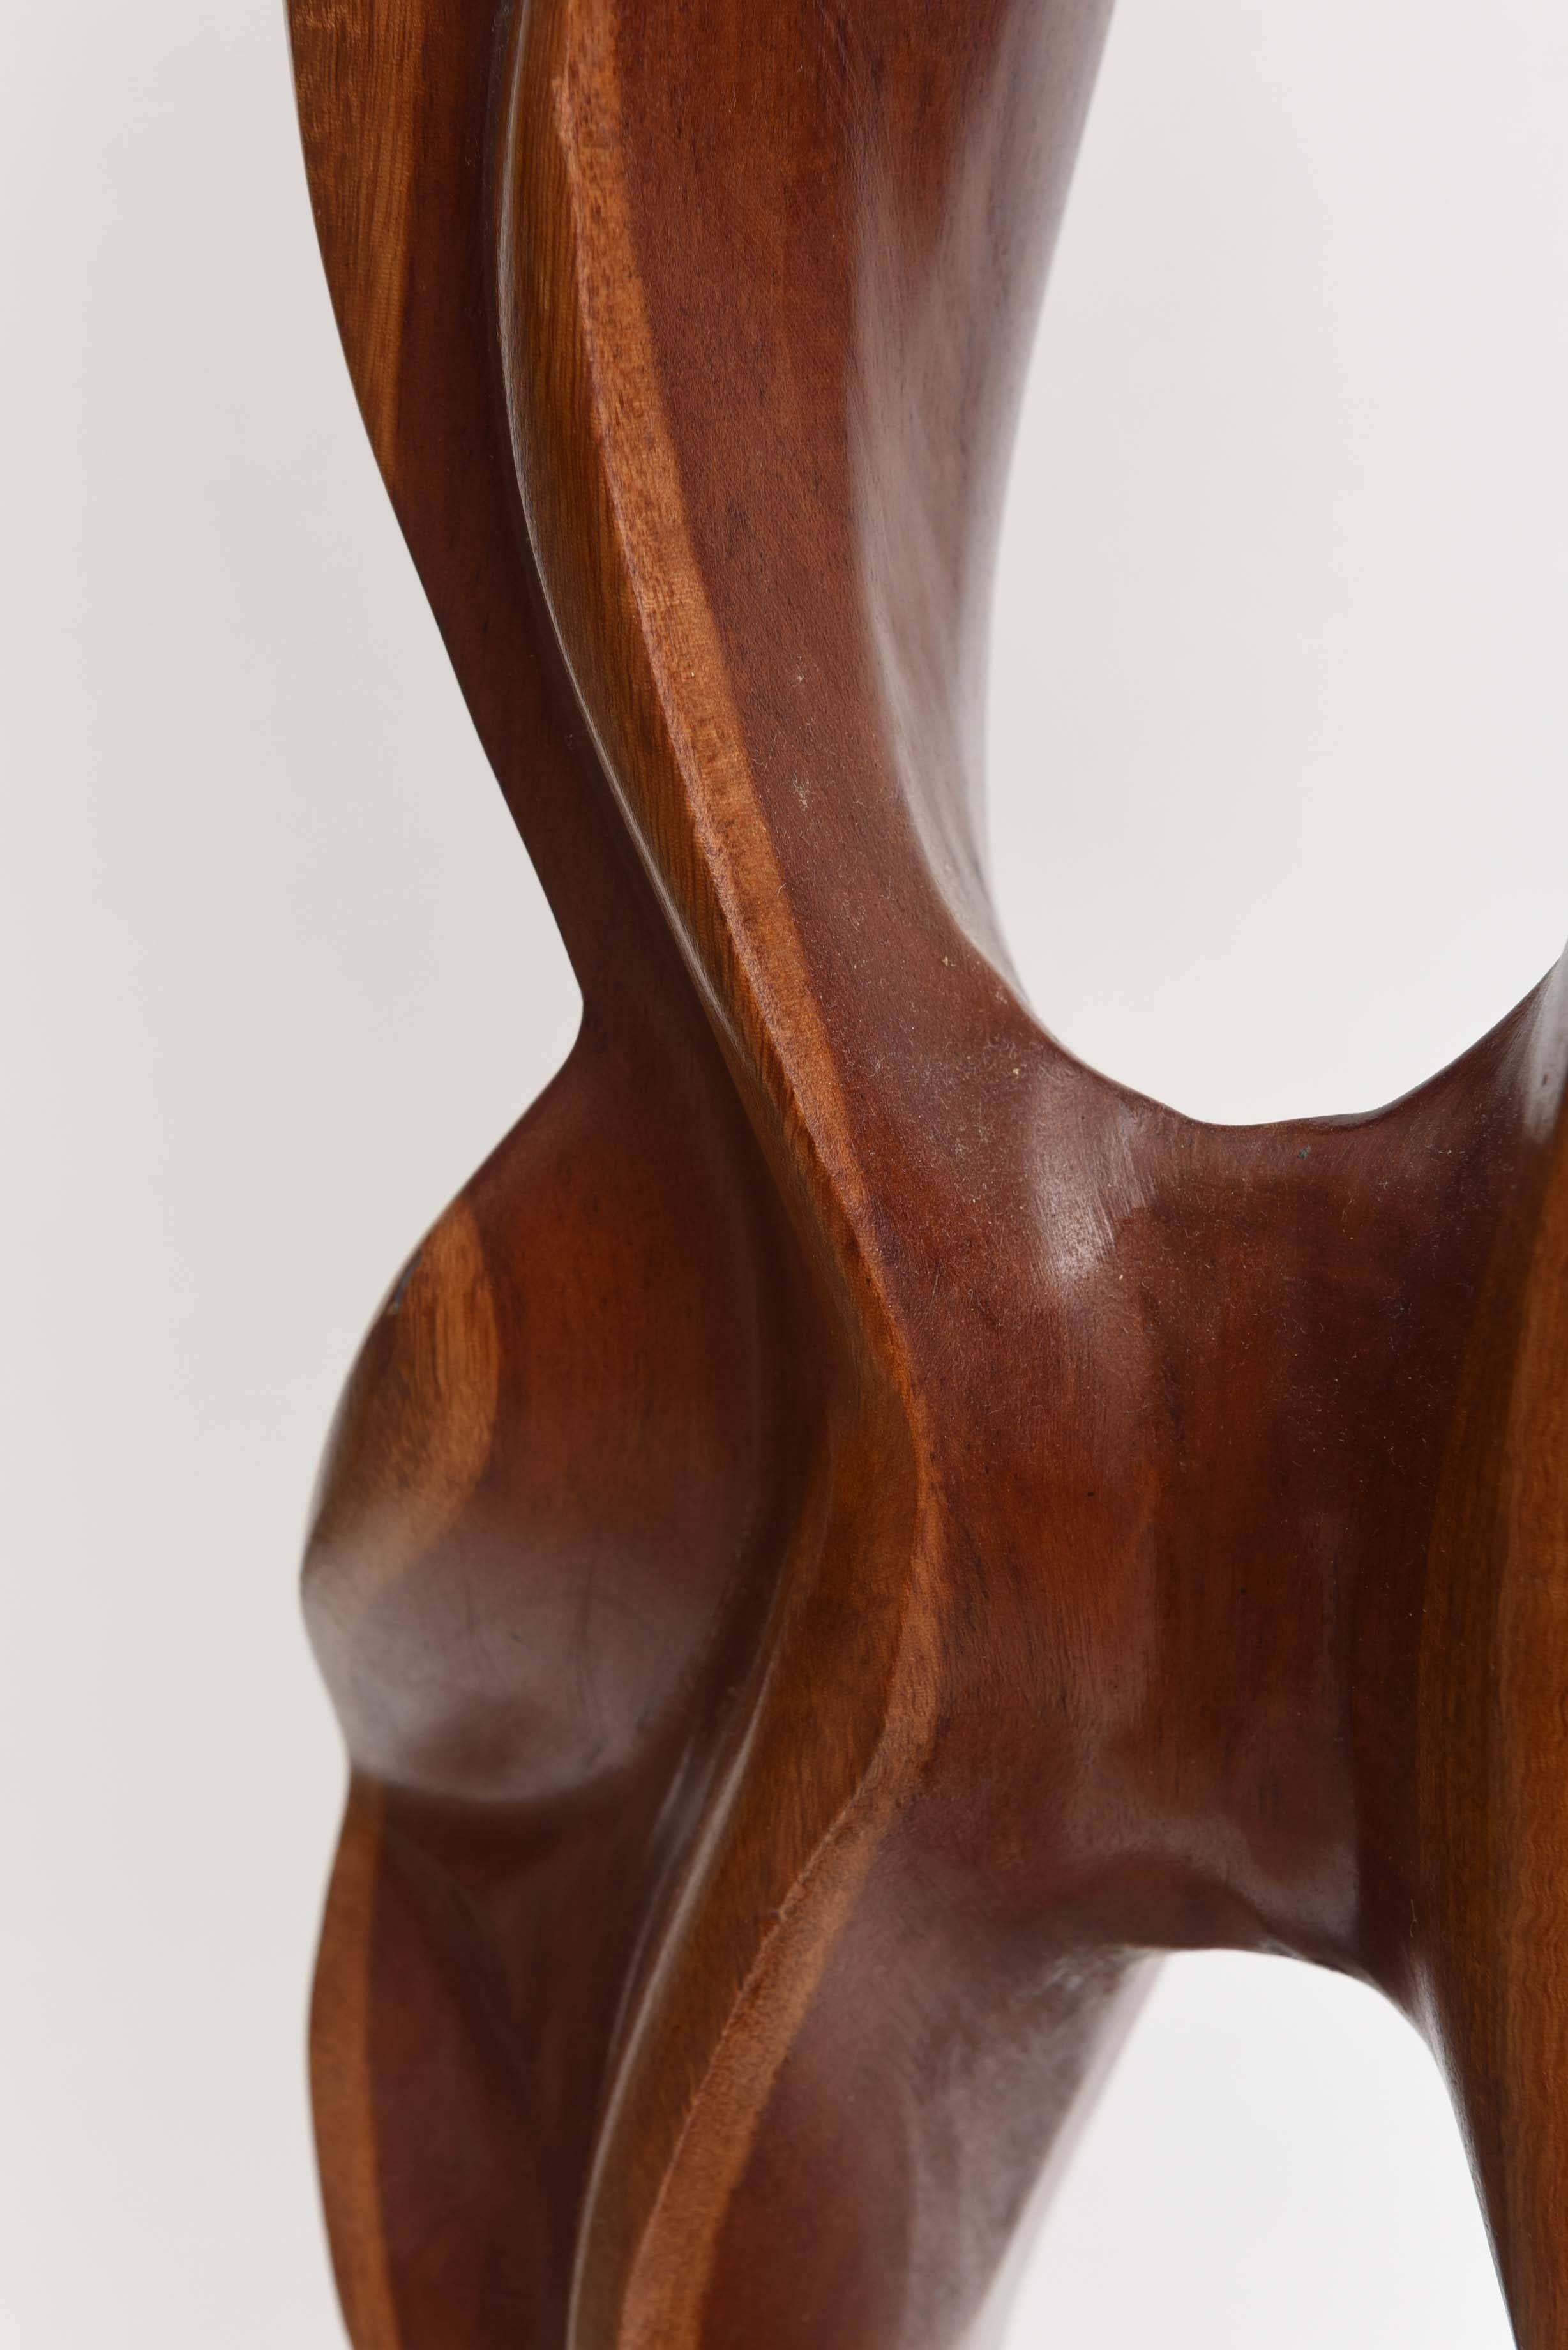 Argentine Abstract Expressionist Wood Sculpture, Raul Varnerin For Sale